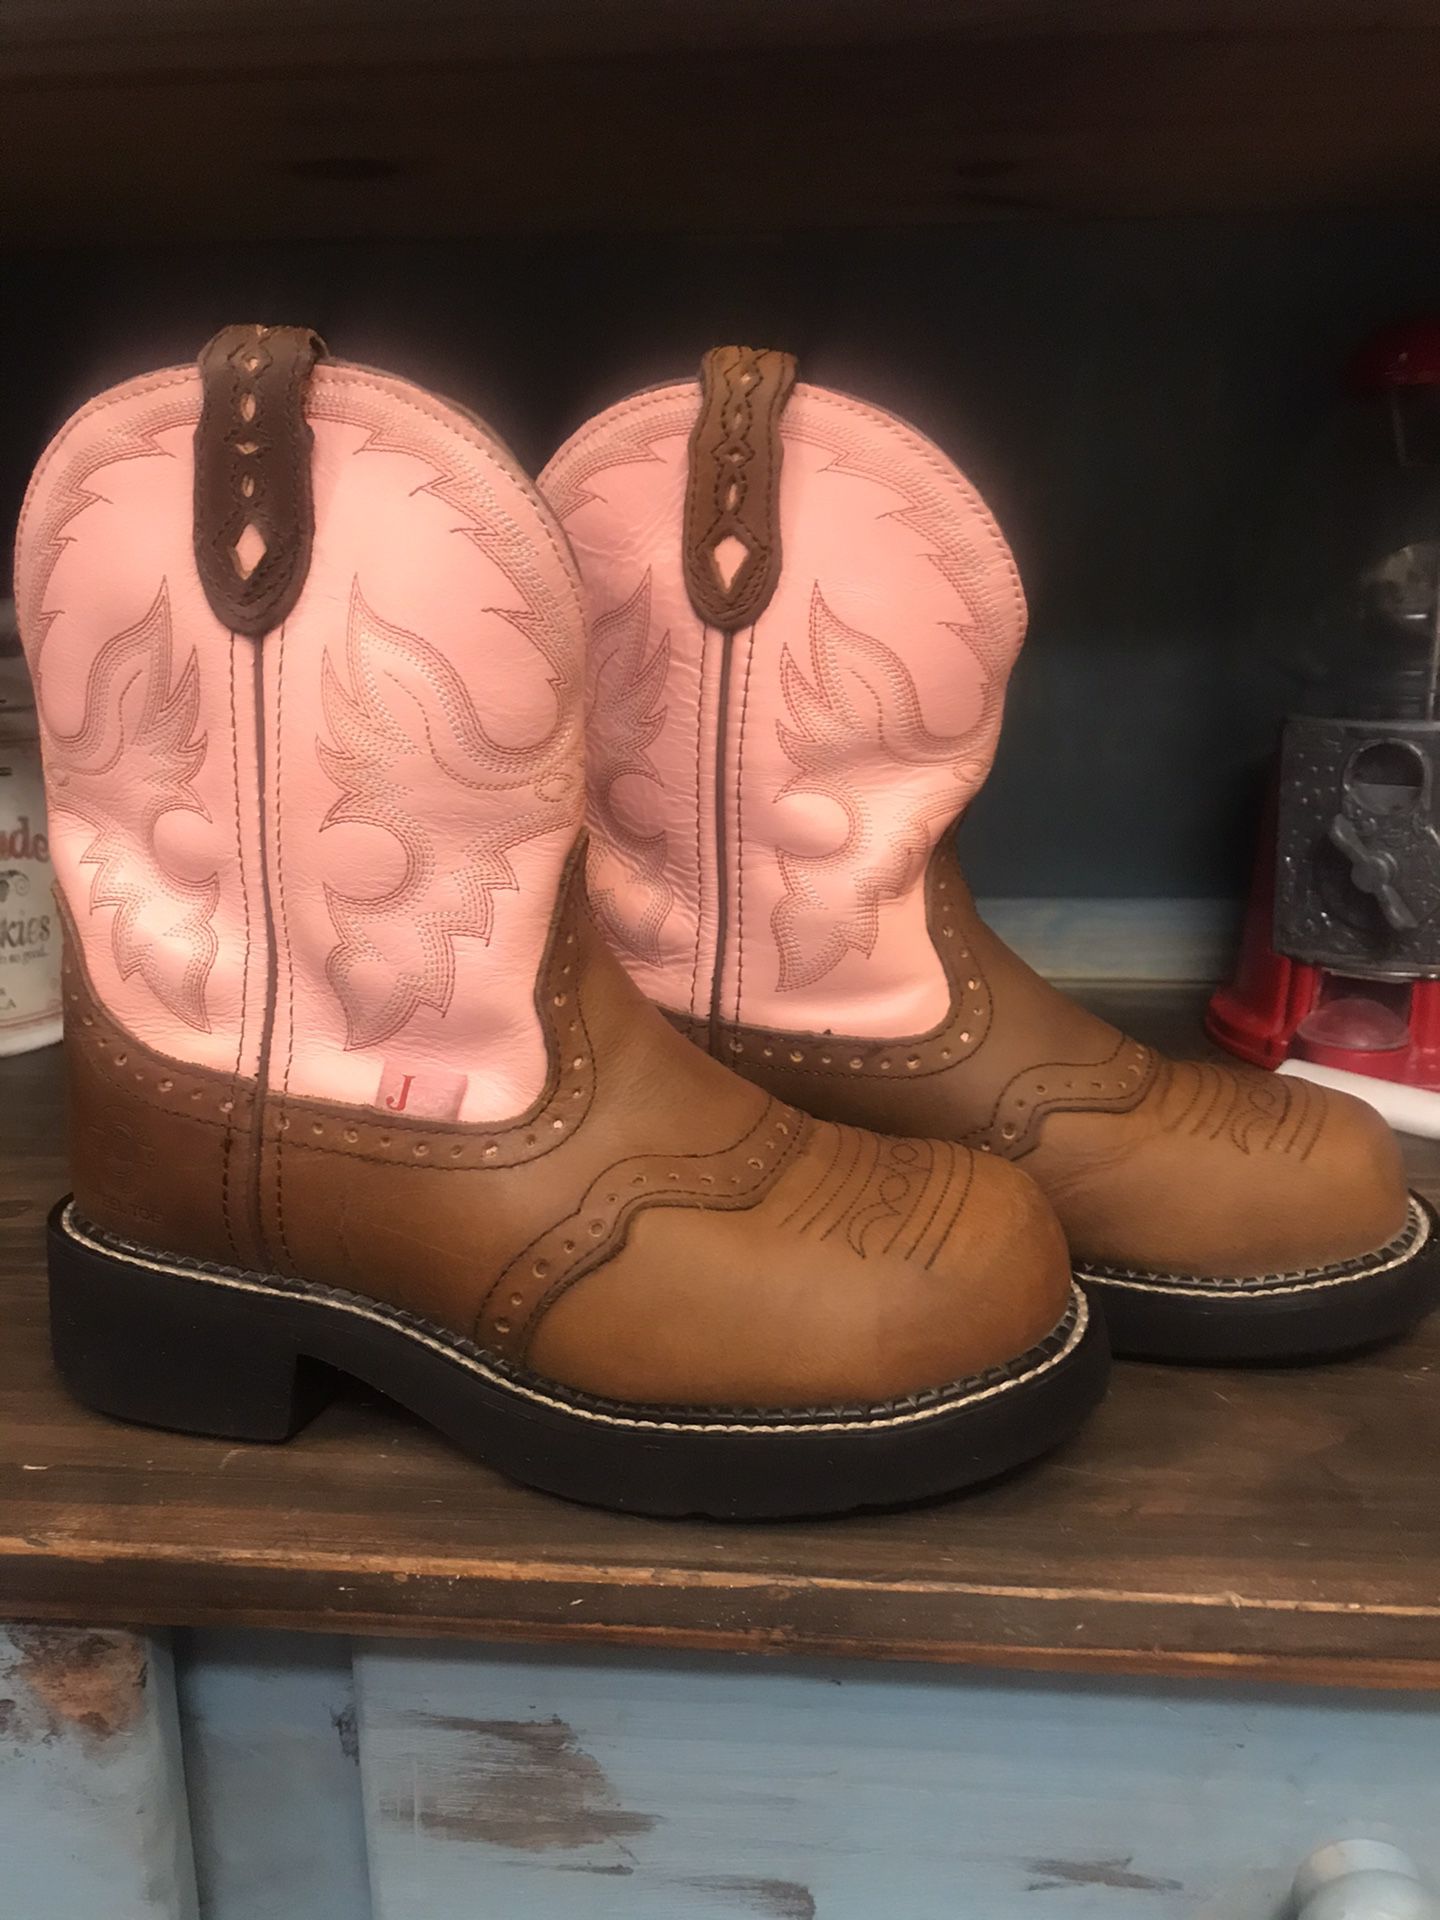 Girls size 6.5 Justin boots